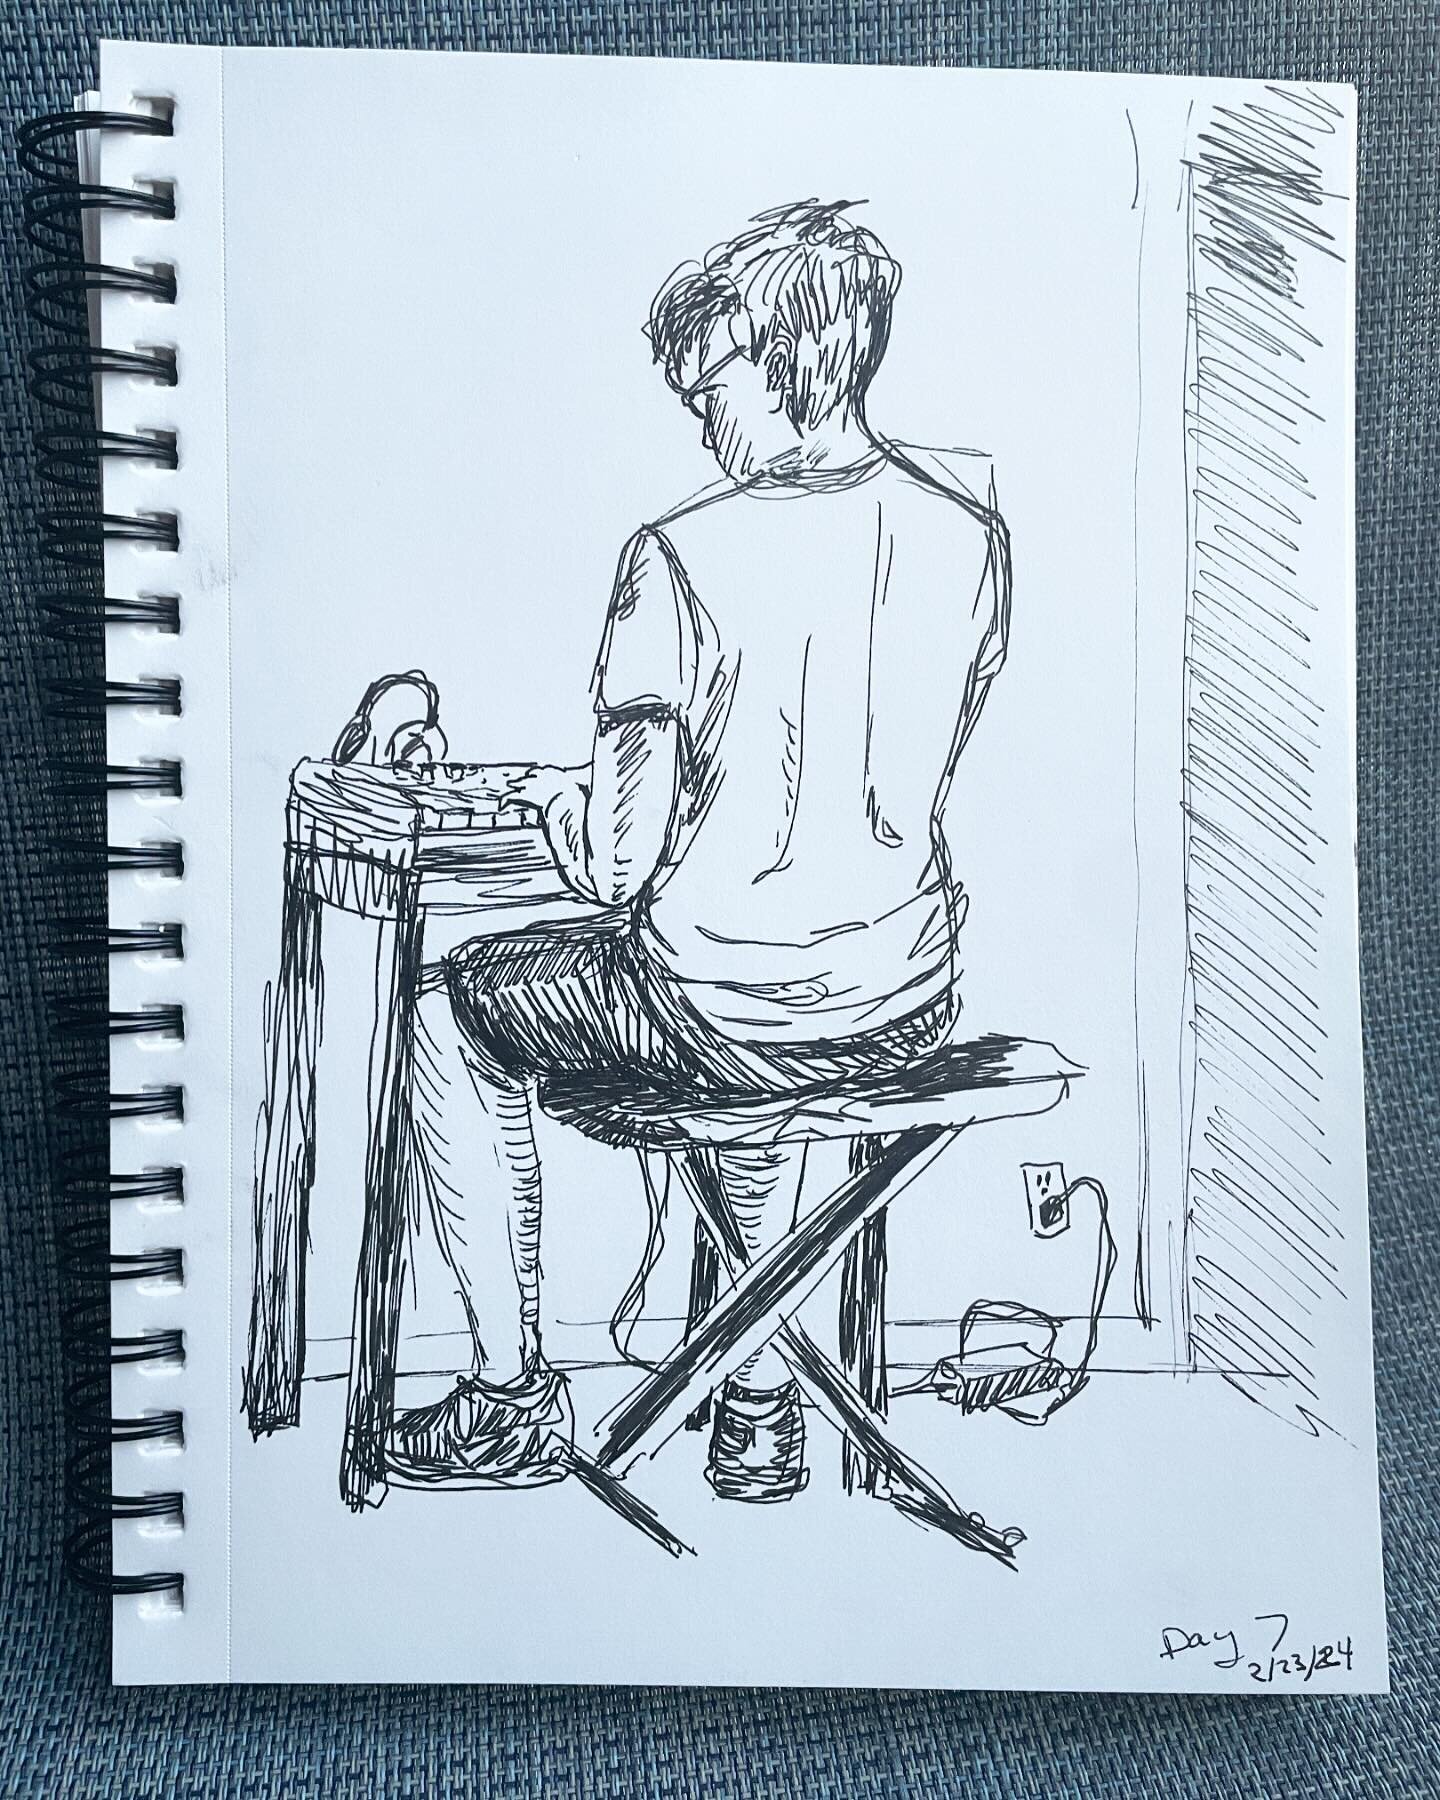 Day 7 ✅ finished today&rsquo;s drawing quick! About 10 min to capture Chase while he played keyboard before running off to our Friday evening plans!
.
.
.
.
.
#100dayproject #drawfromlife #sketchbook #figuredrawing #quickdraw